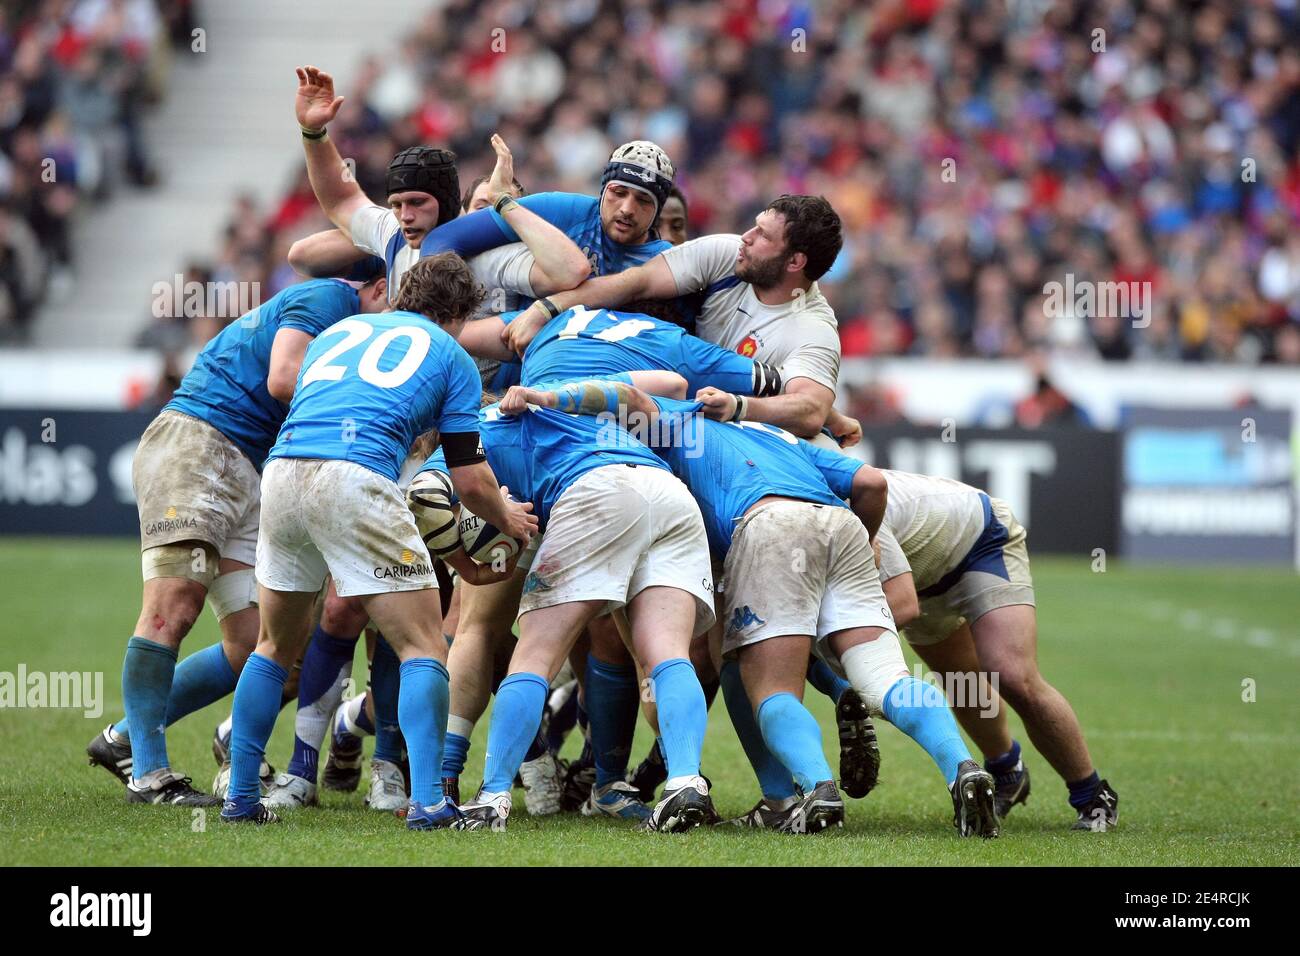 Scrum during the RBS 6 Nations Championship 2008 Rugby Union match, France  vs Italy, at the Stade de France in Saint-Denis, outside Paris, France on  March 9, 2008. France won 25-13. Photo